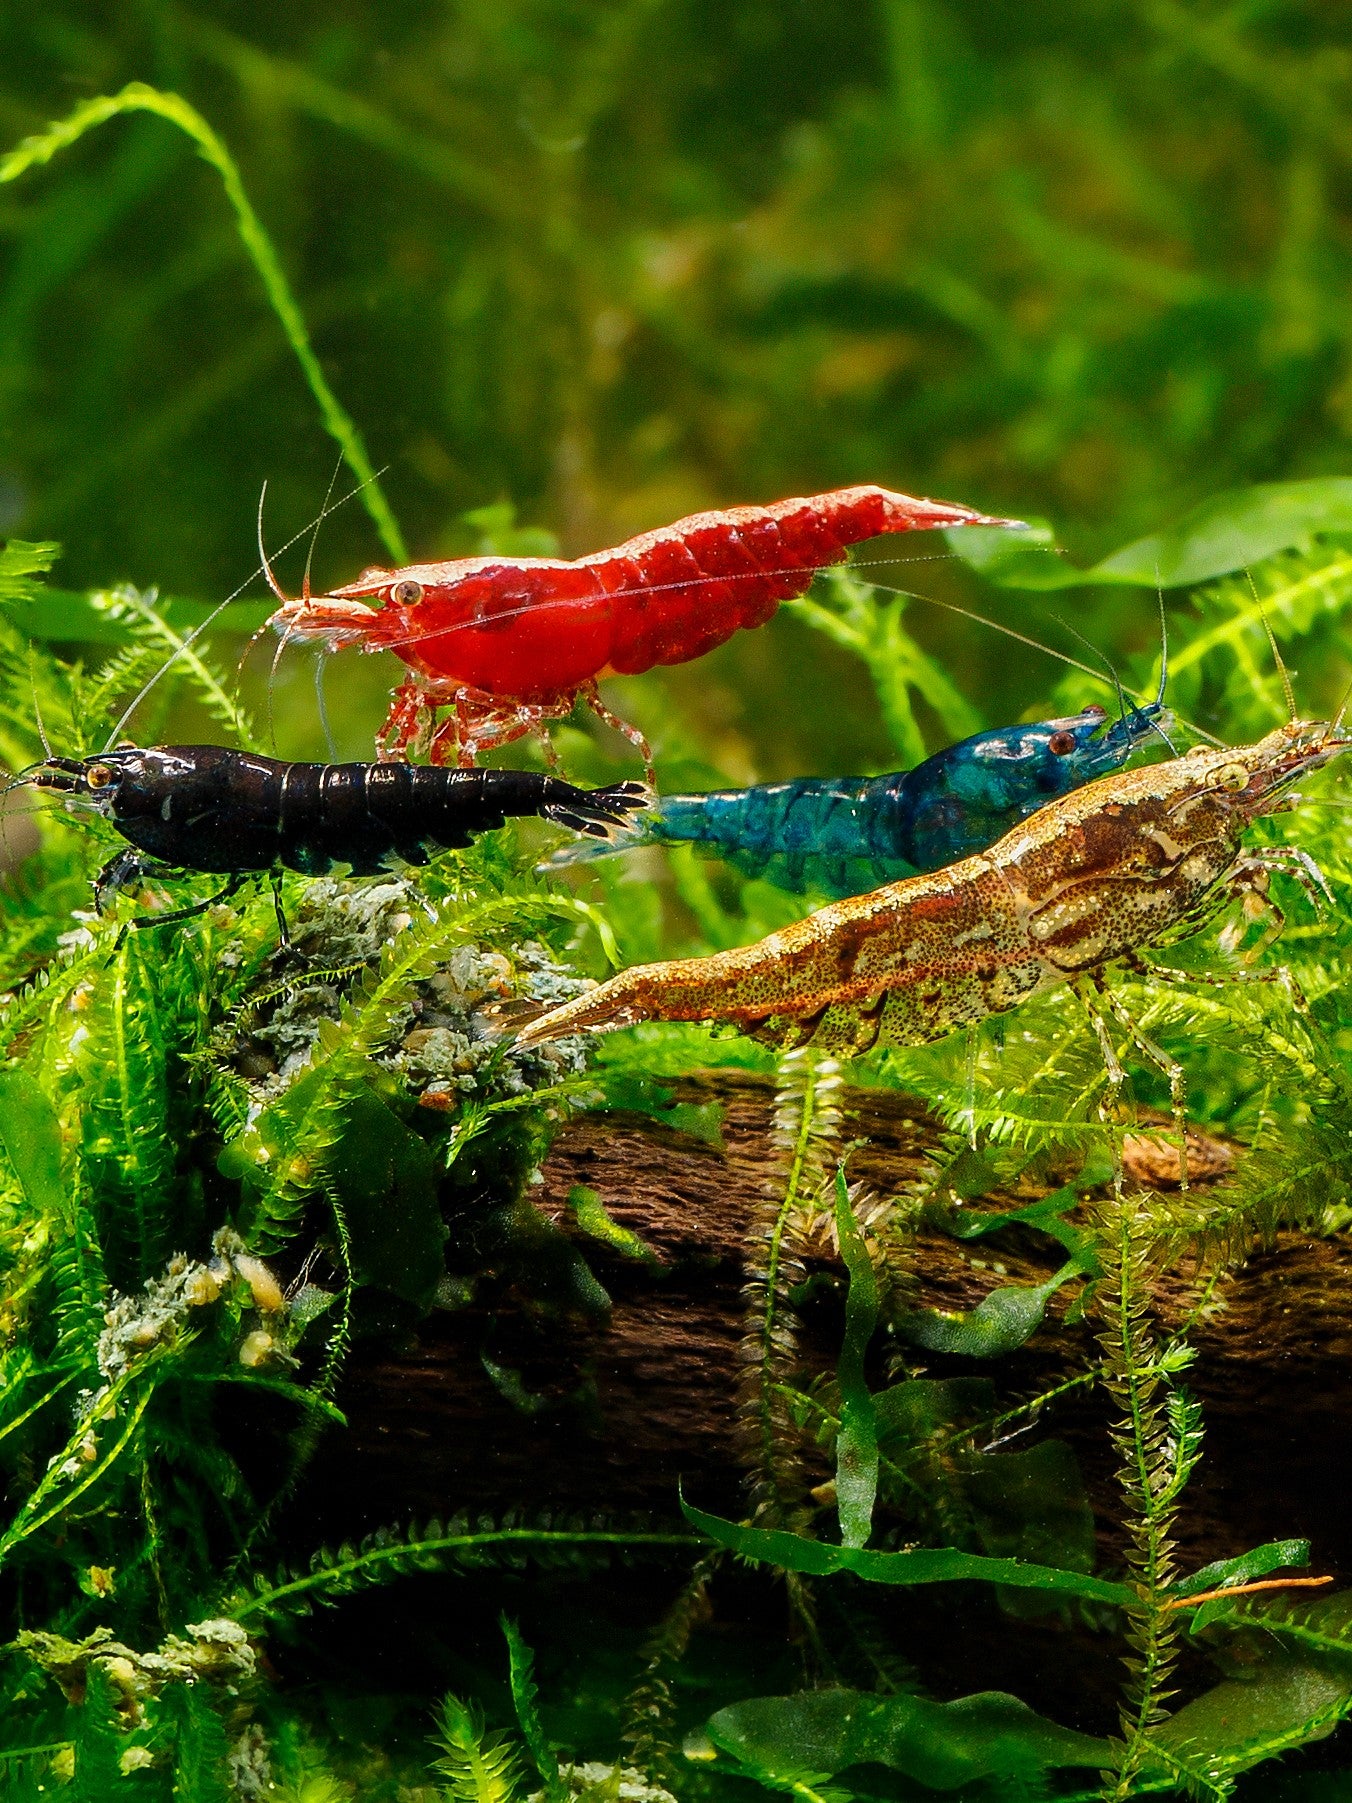 High grade mixed cherry shrimp from our online store. We deliver across Canada. Buy from Cherry Shrimp Canada today!